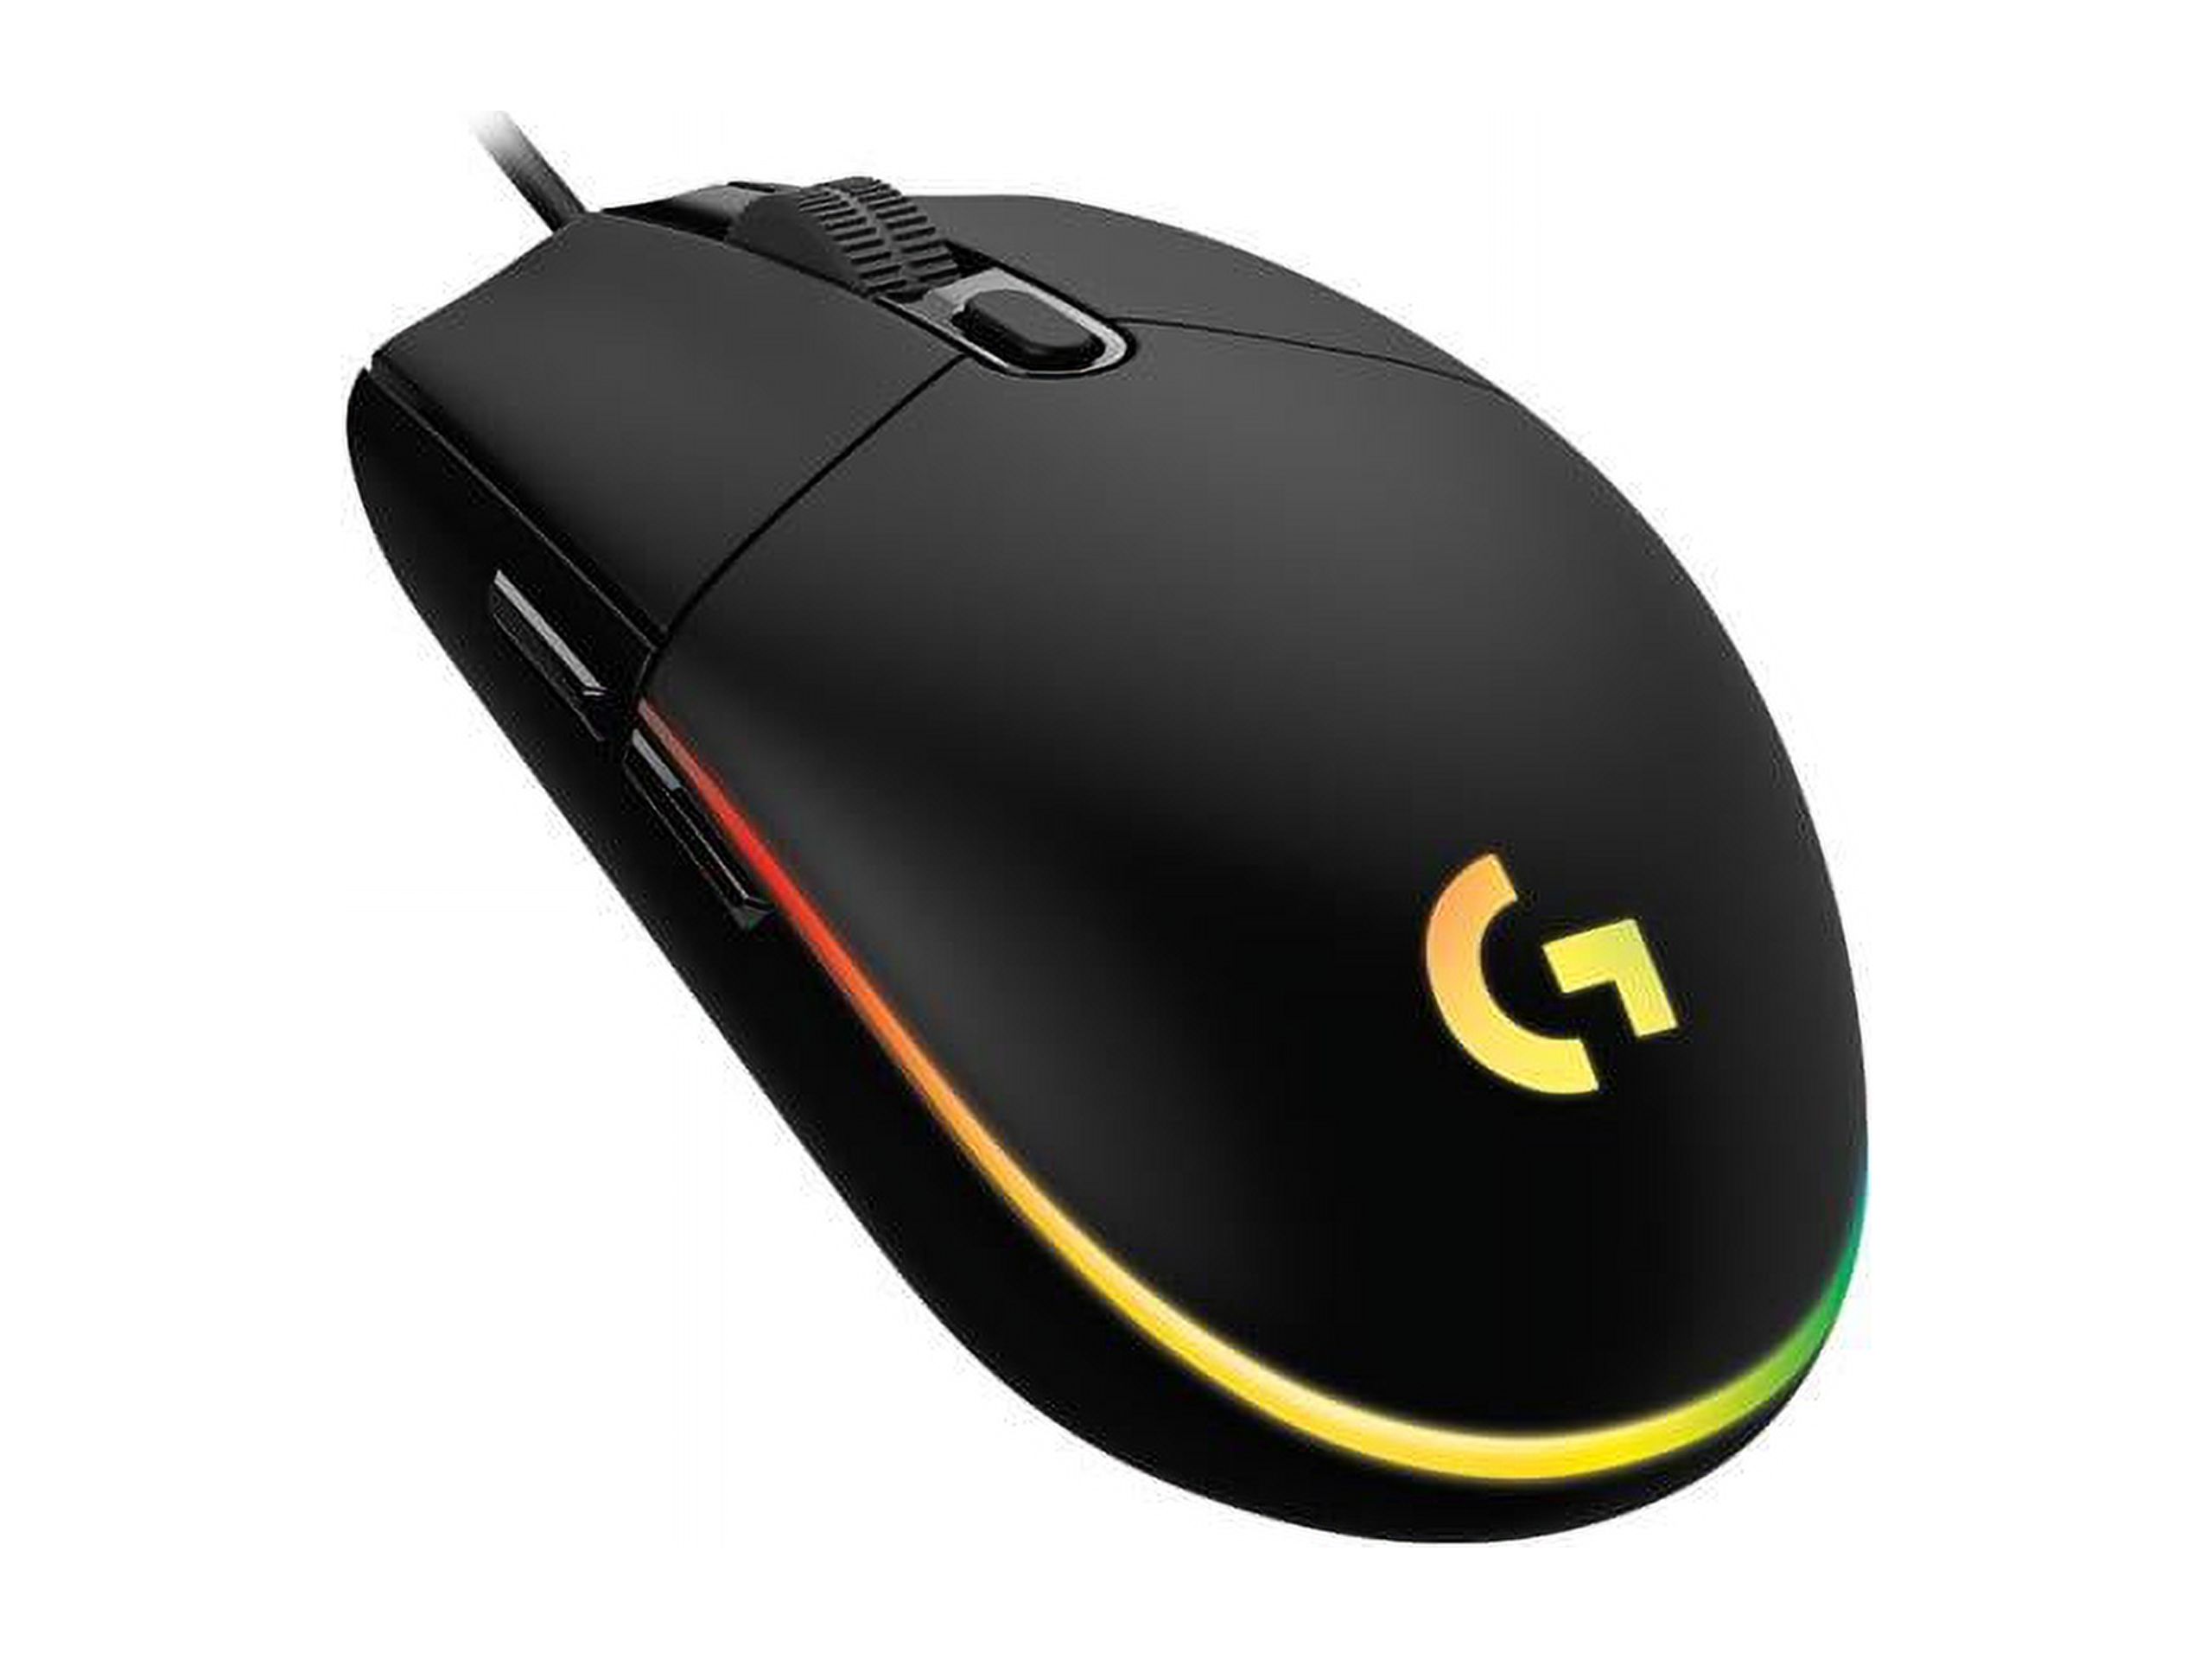 Logitech G203 Wired Gaming Mouse, 8,000 DPI, Rainbow Optical Effect LIGHTSYNC RGB, 6 Programmable Buttons, On-Board Memory, Screen Mapping, PC/Mac Computer and Laptop Compatible - Black - image 1 of 7